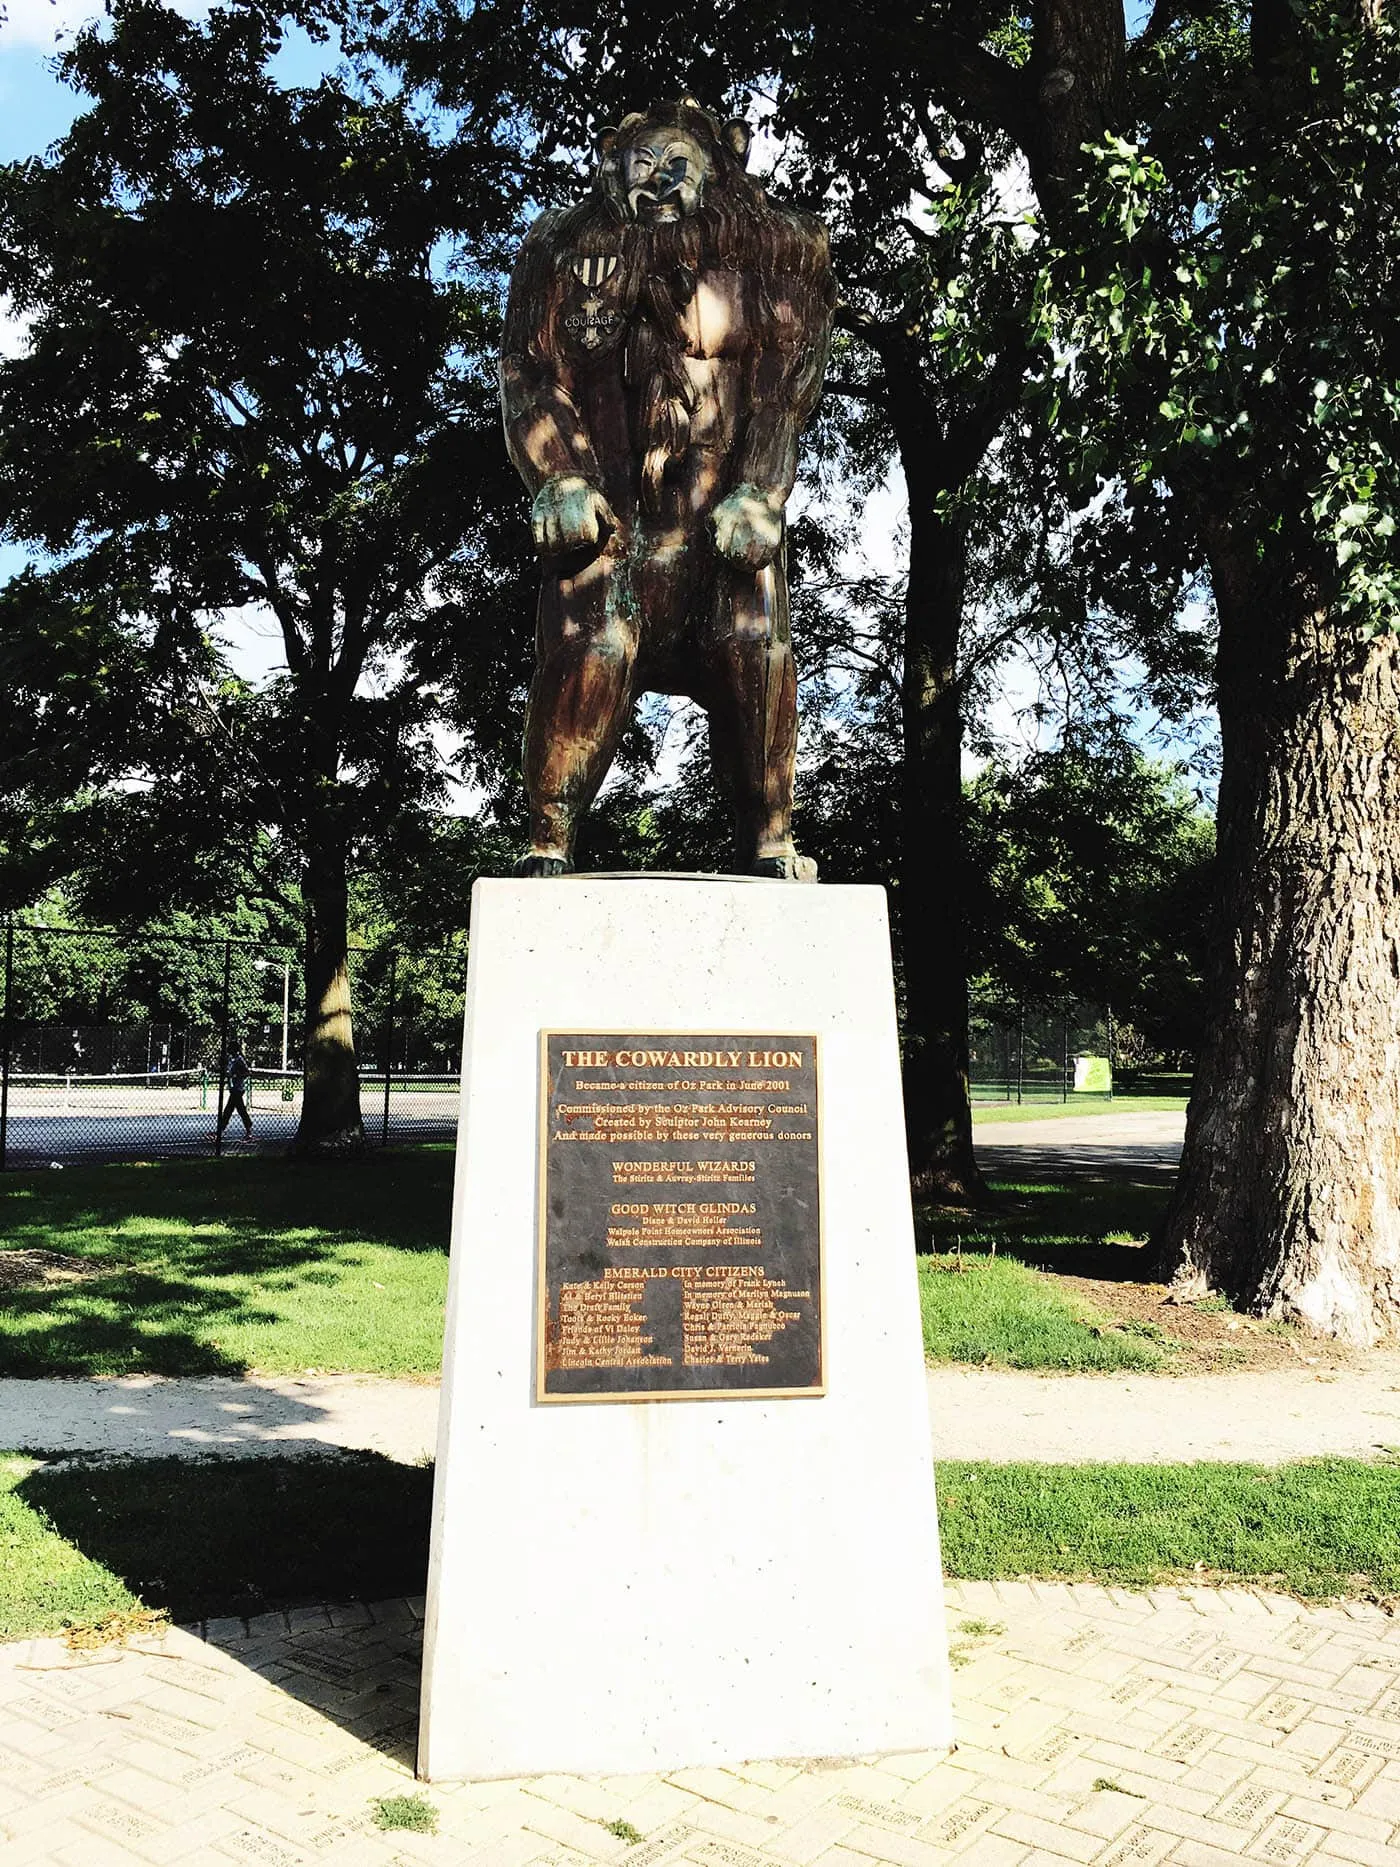 The Cowardly Lion  statue at Oz Park in Chicago, Illinois - a Wizard of Oz themed Park.